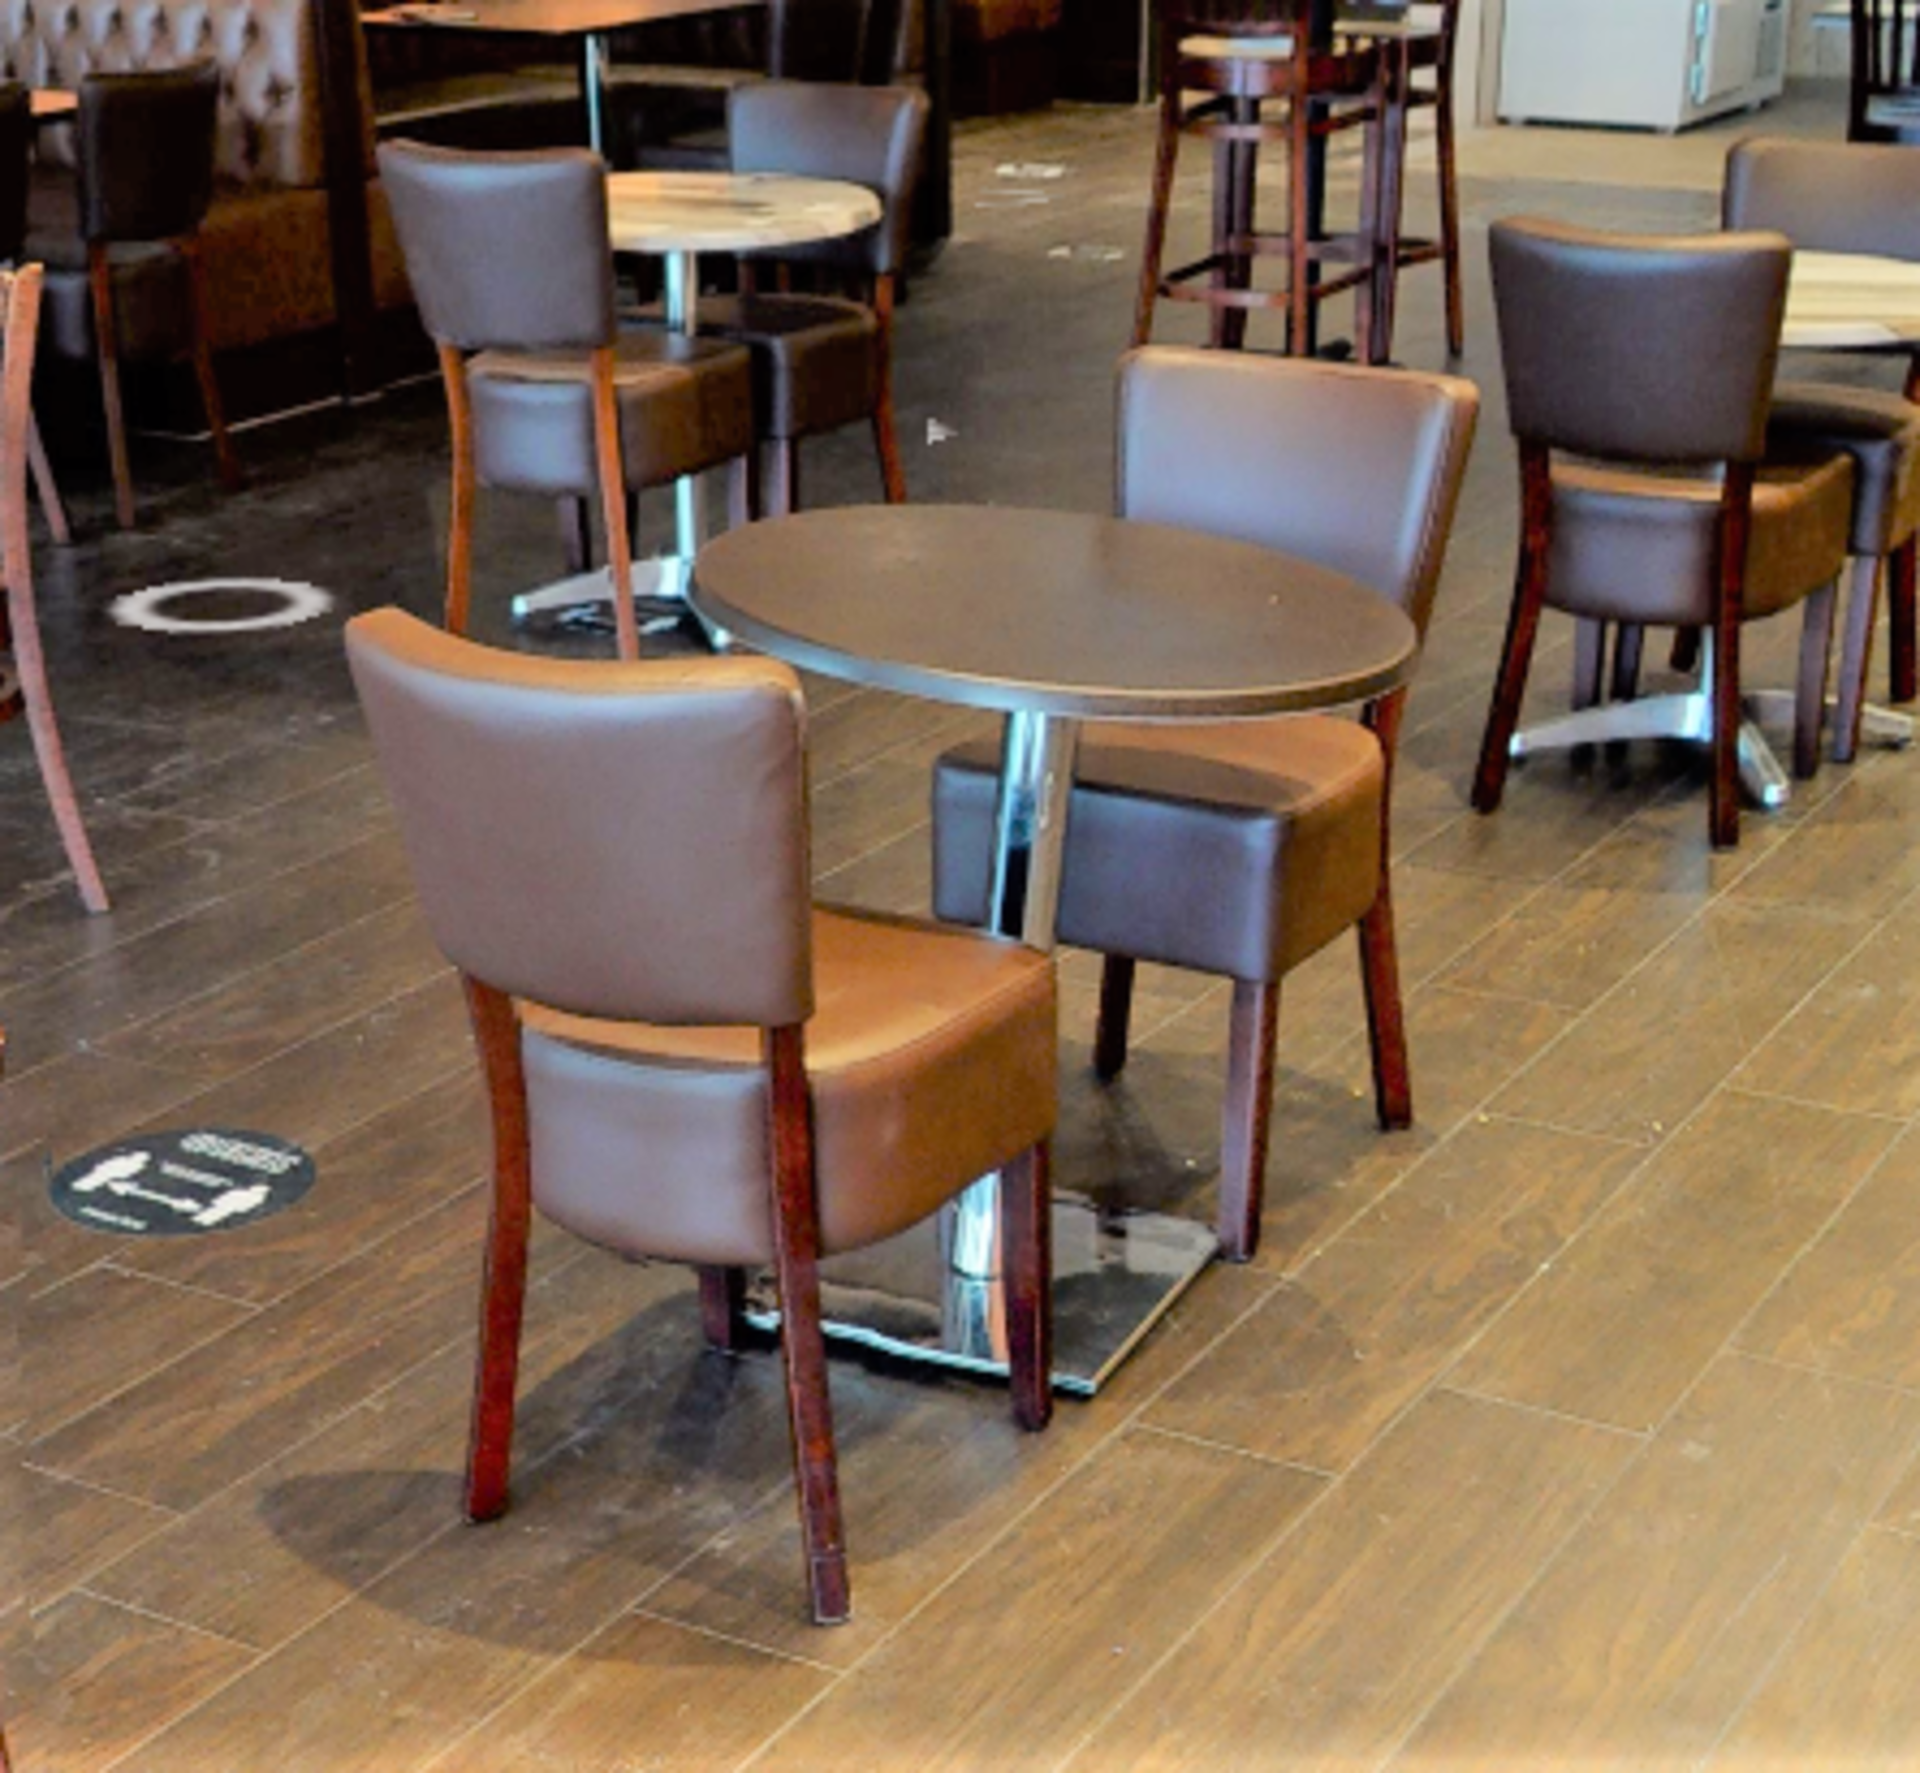 8 x Restaurant Chairs With Brown Leather Seat Pads and Padded Backrests - CL701 - Location: Ashton - Image 4 of 9